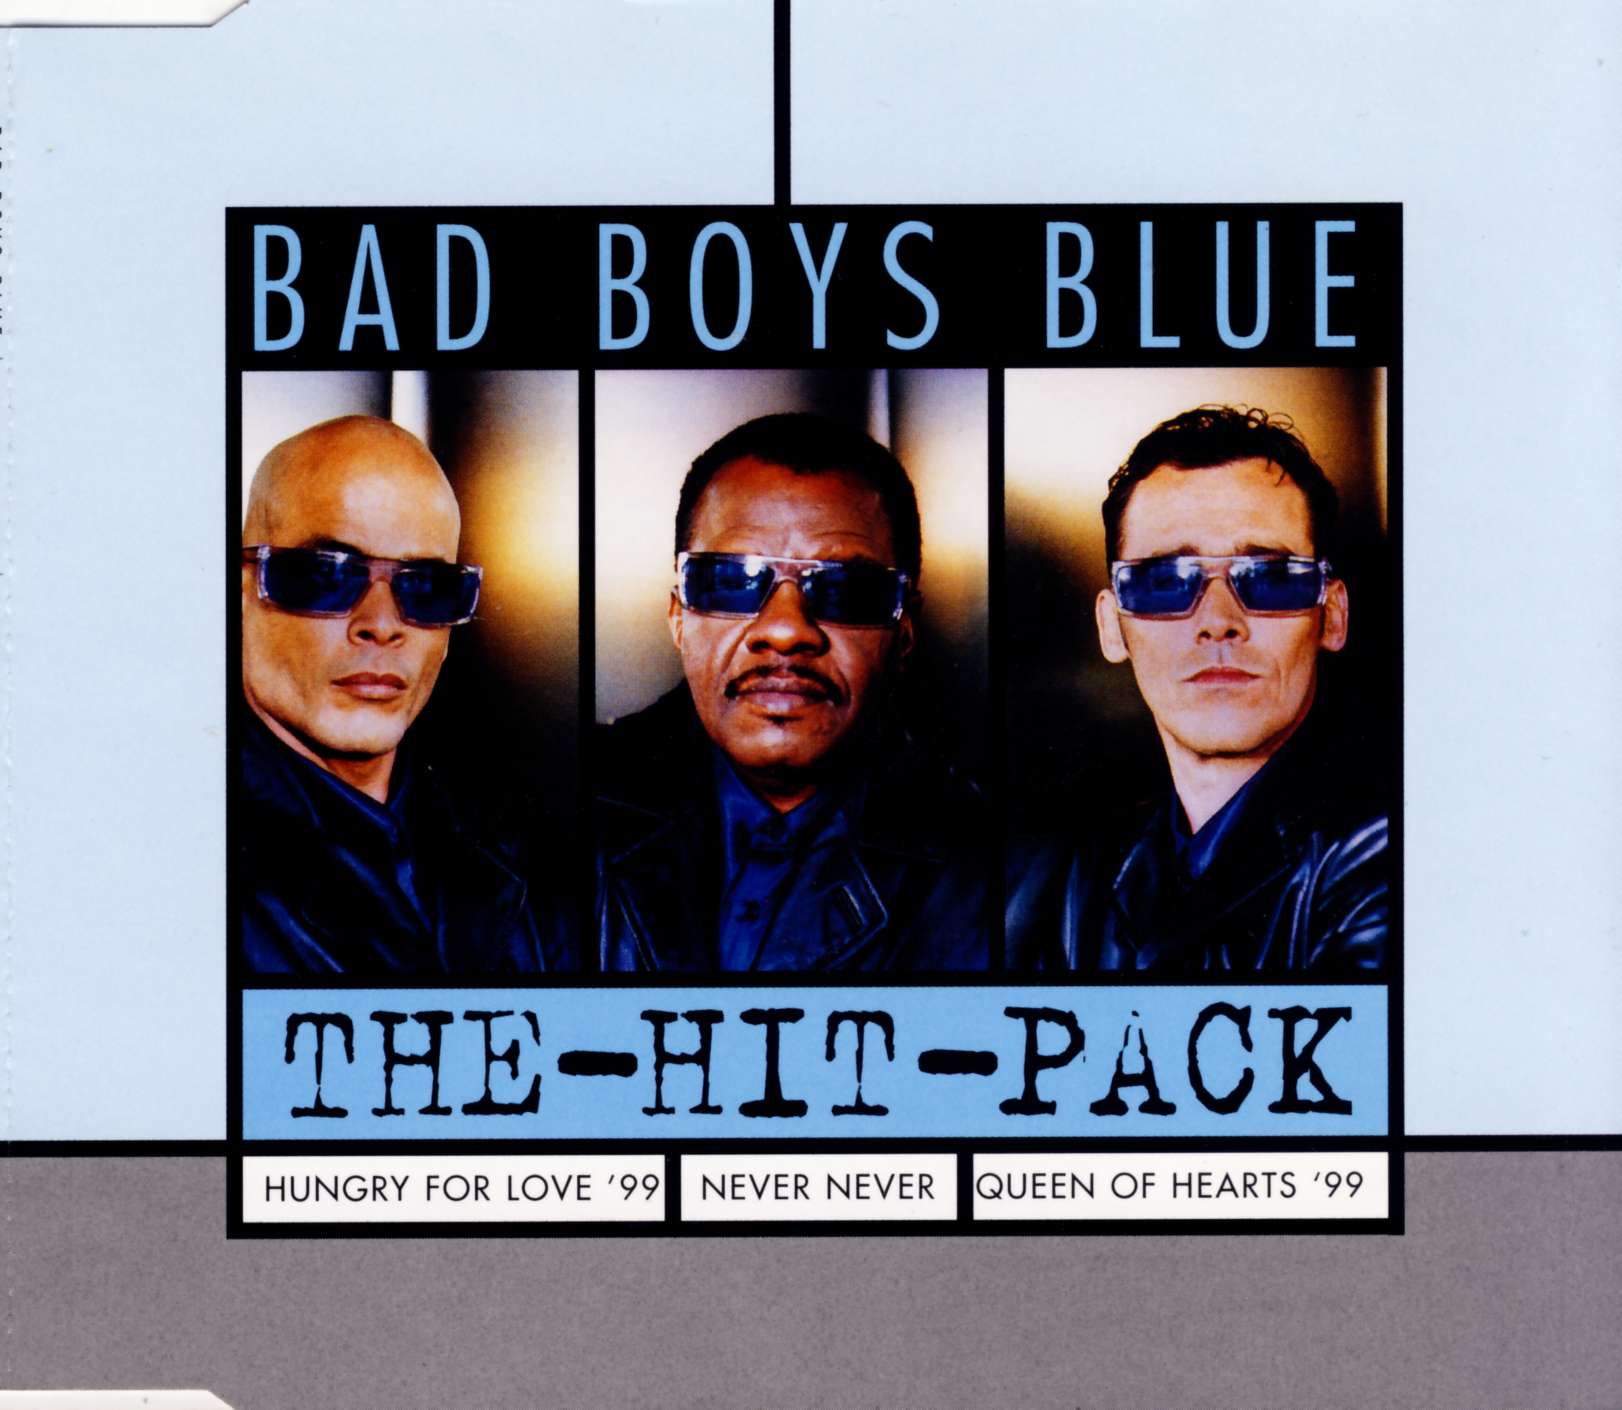 BAD BOYS BLUE - The Hit Pack - CD Maxi